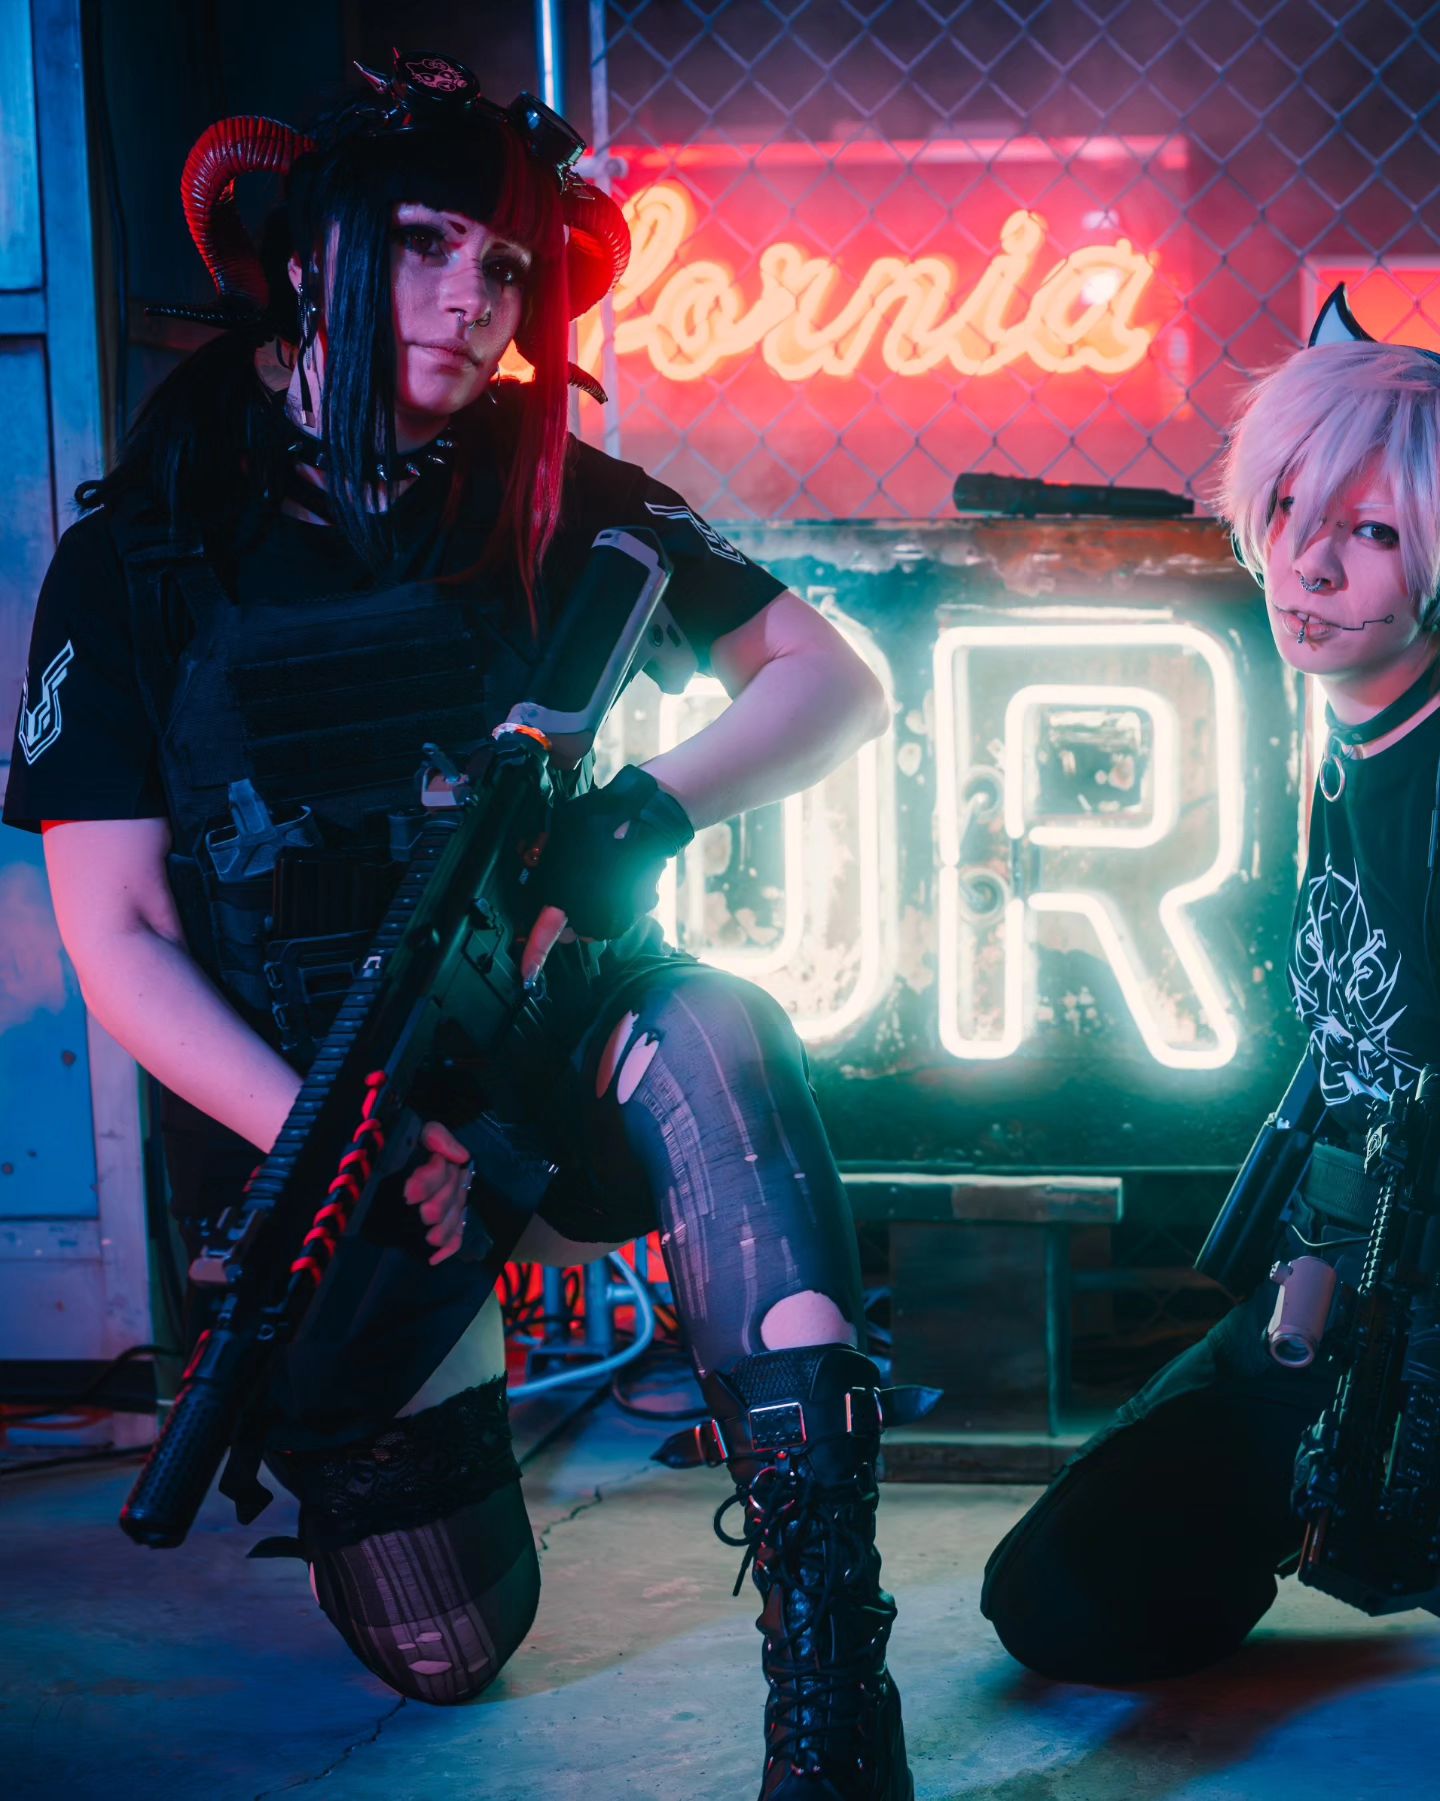 Welcome to Night City News, chooms! A new and mysterious bounty hunter group has emerged. Who are the Death Dealers?! And how fast will they rise up the ranks in Night City?
.
.
.
Models: @basicwitchz // @nek0aiartwork // @some_metal_dude
Studio: @neondemonstudio // @evilempirestudios 
.
.
.
#NeonDemonStudio #neonlights #neonsign #metalhead #gothfashion #gothstyle #nightcity #cyberpunk2077 #techwearninja #techwearnexus #neotokyo #neonvibes #cybercity #techwearfashion #portrait_shooterz #portraitsvisuals #techwear  #portrait_vision #edgerunners  #the6ix #tdot #techwearclub #streetwear #PortraitPage #warcore  #cosplay #torontocosplay #punkrock